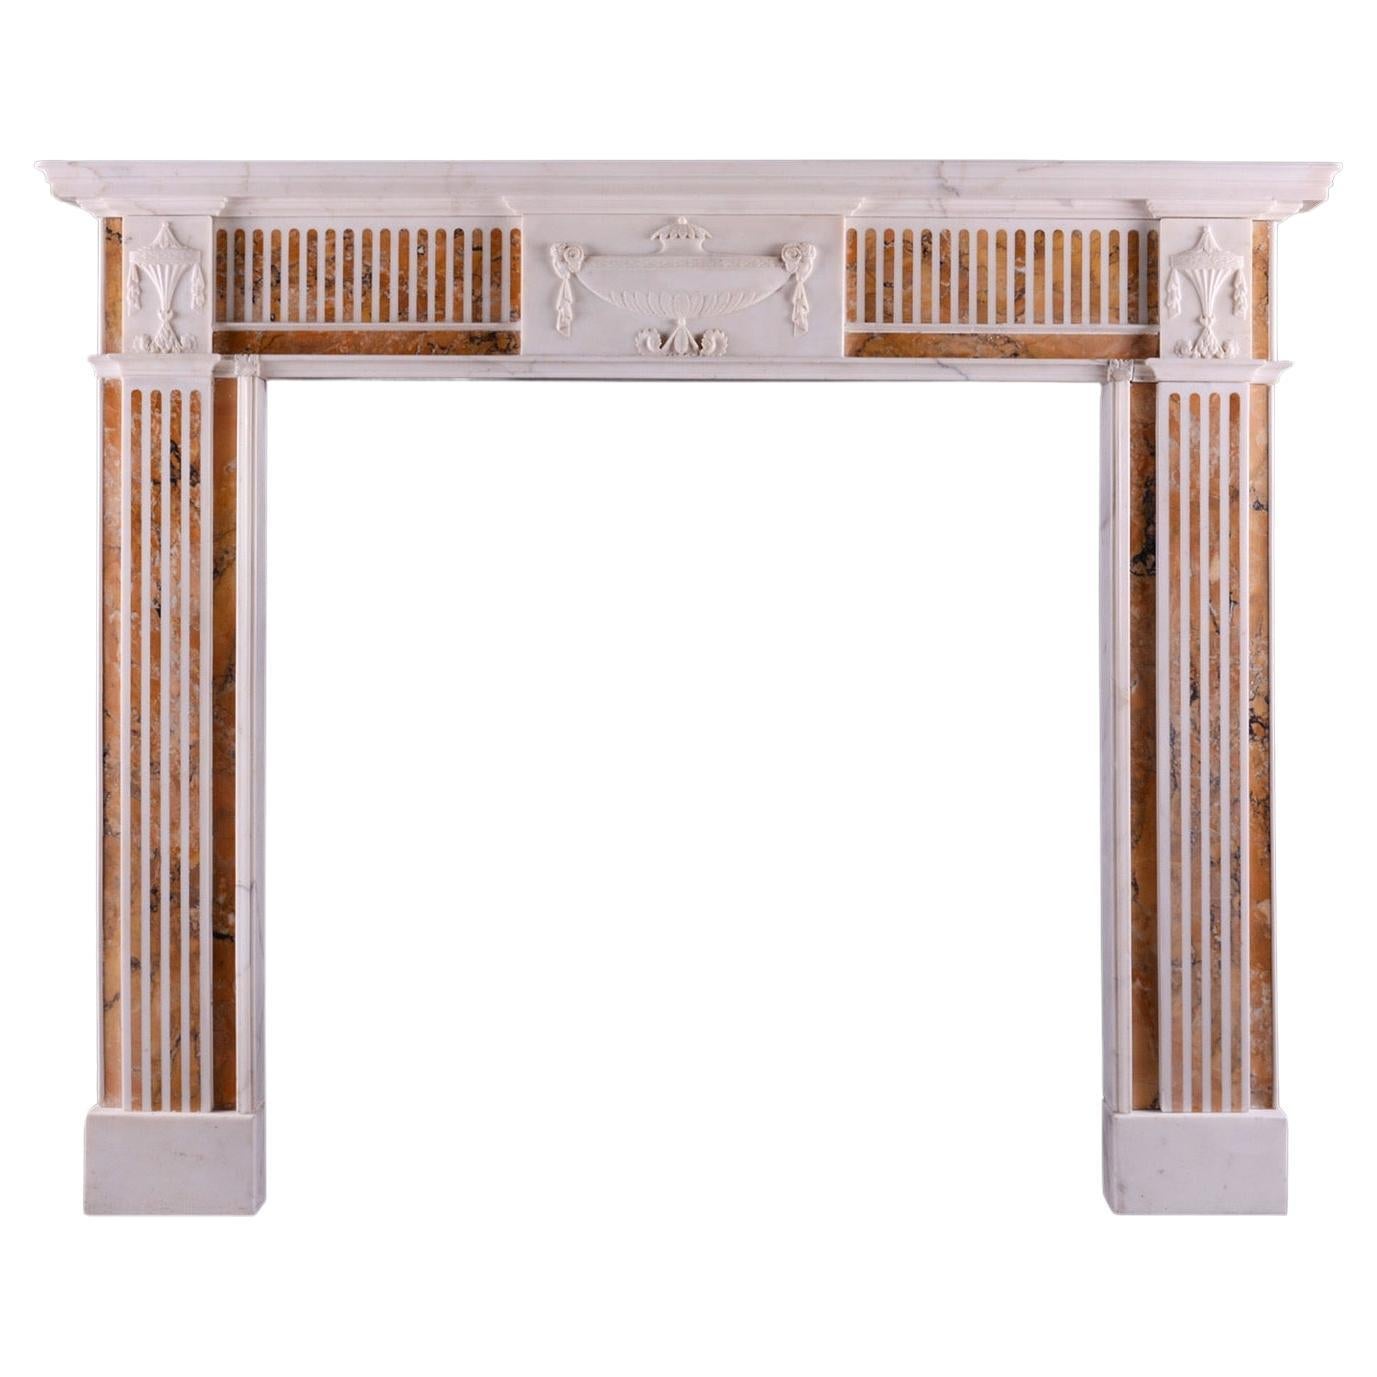 An English Statuary Fireplace with Italian Siena Marble Inlay For Sale